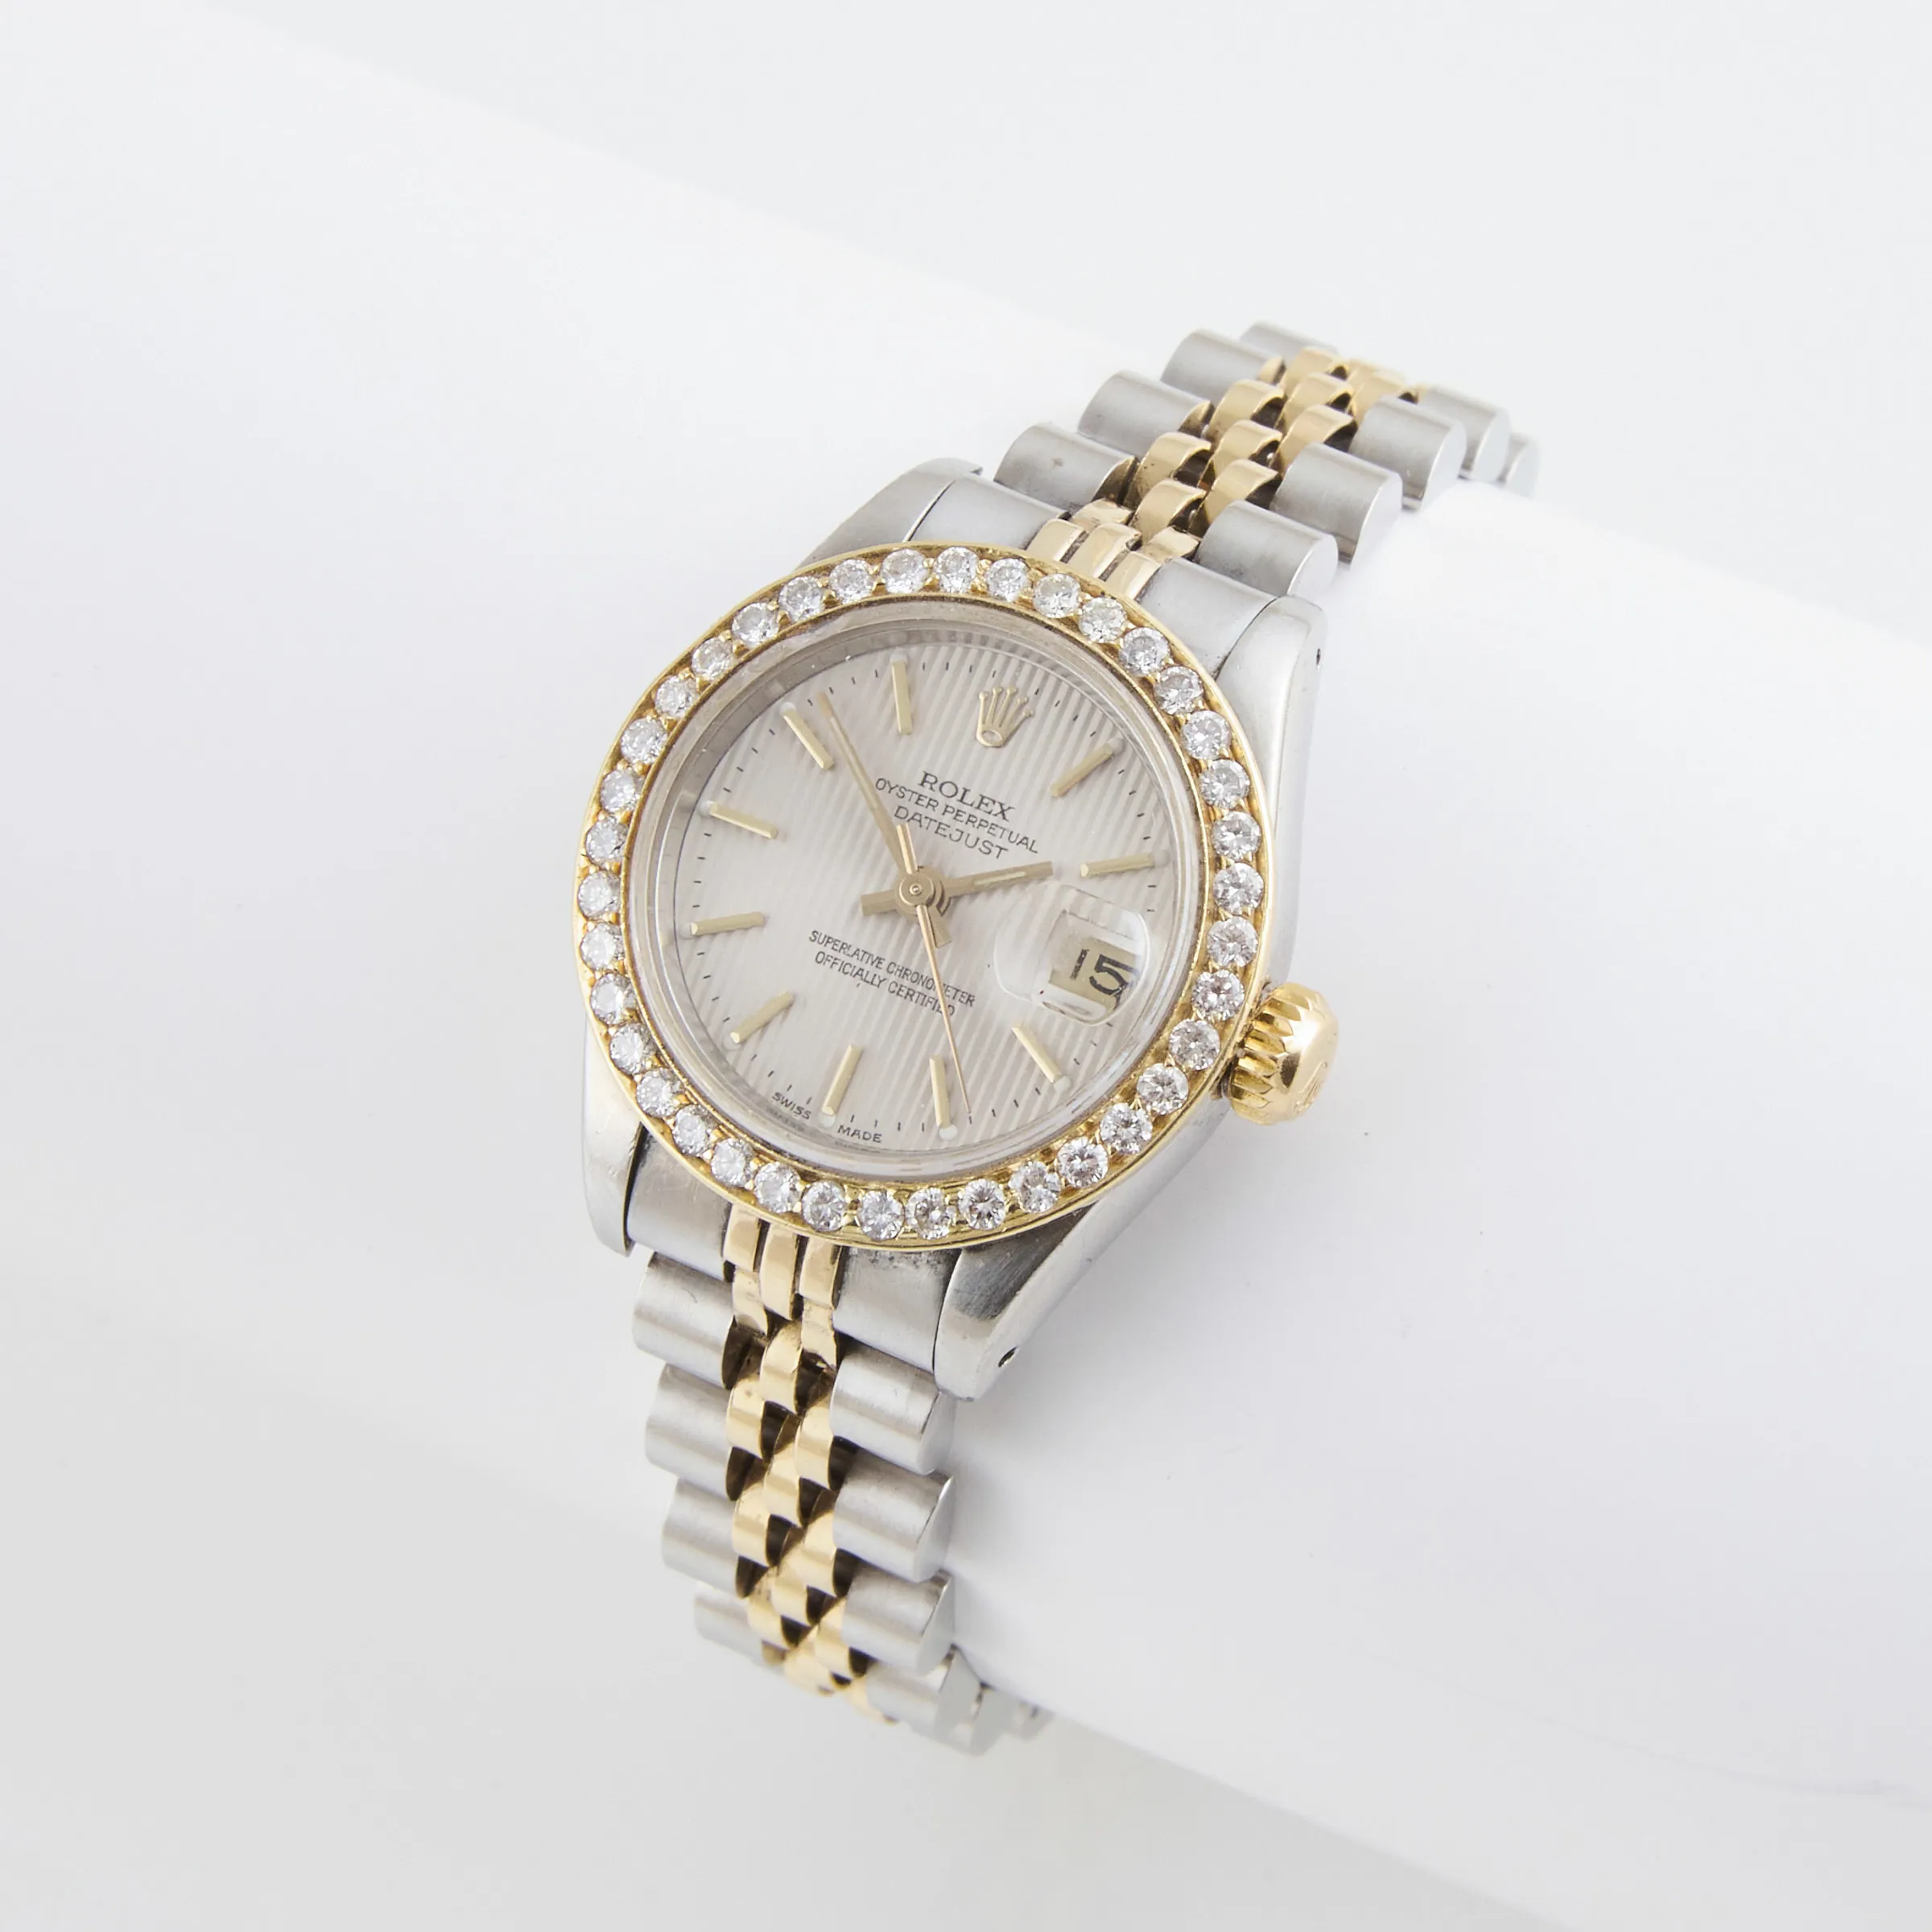 Rolex Lady-Datejust 69173 26mm Yellow gold, stainless steel and diamond-set Silver